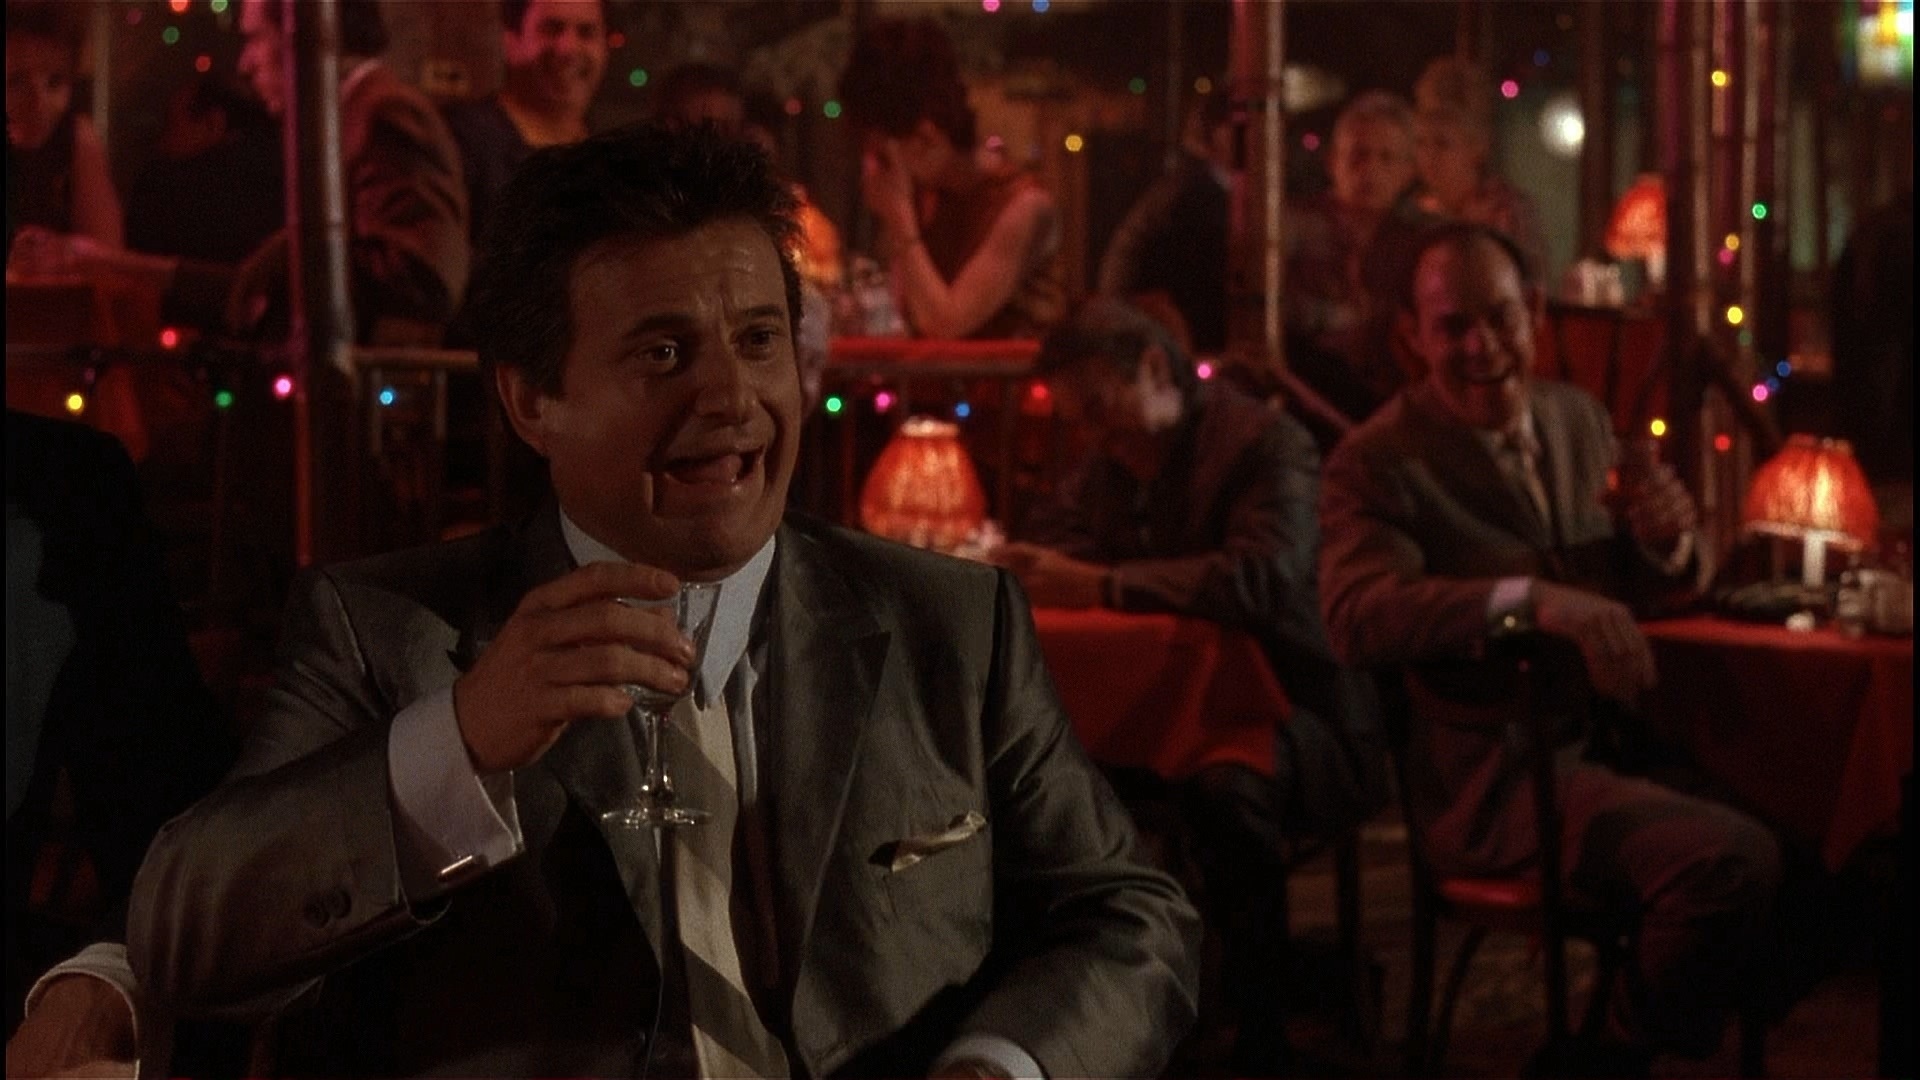 Joe Pesci, Top-rated wallpapers, Free backgrounds, High-quality images, 1920x1080 Full HD Desktop